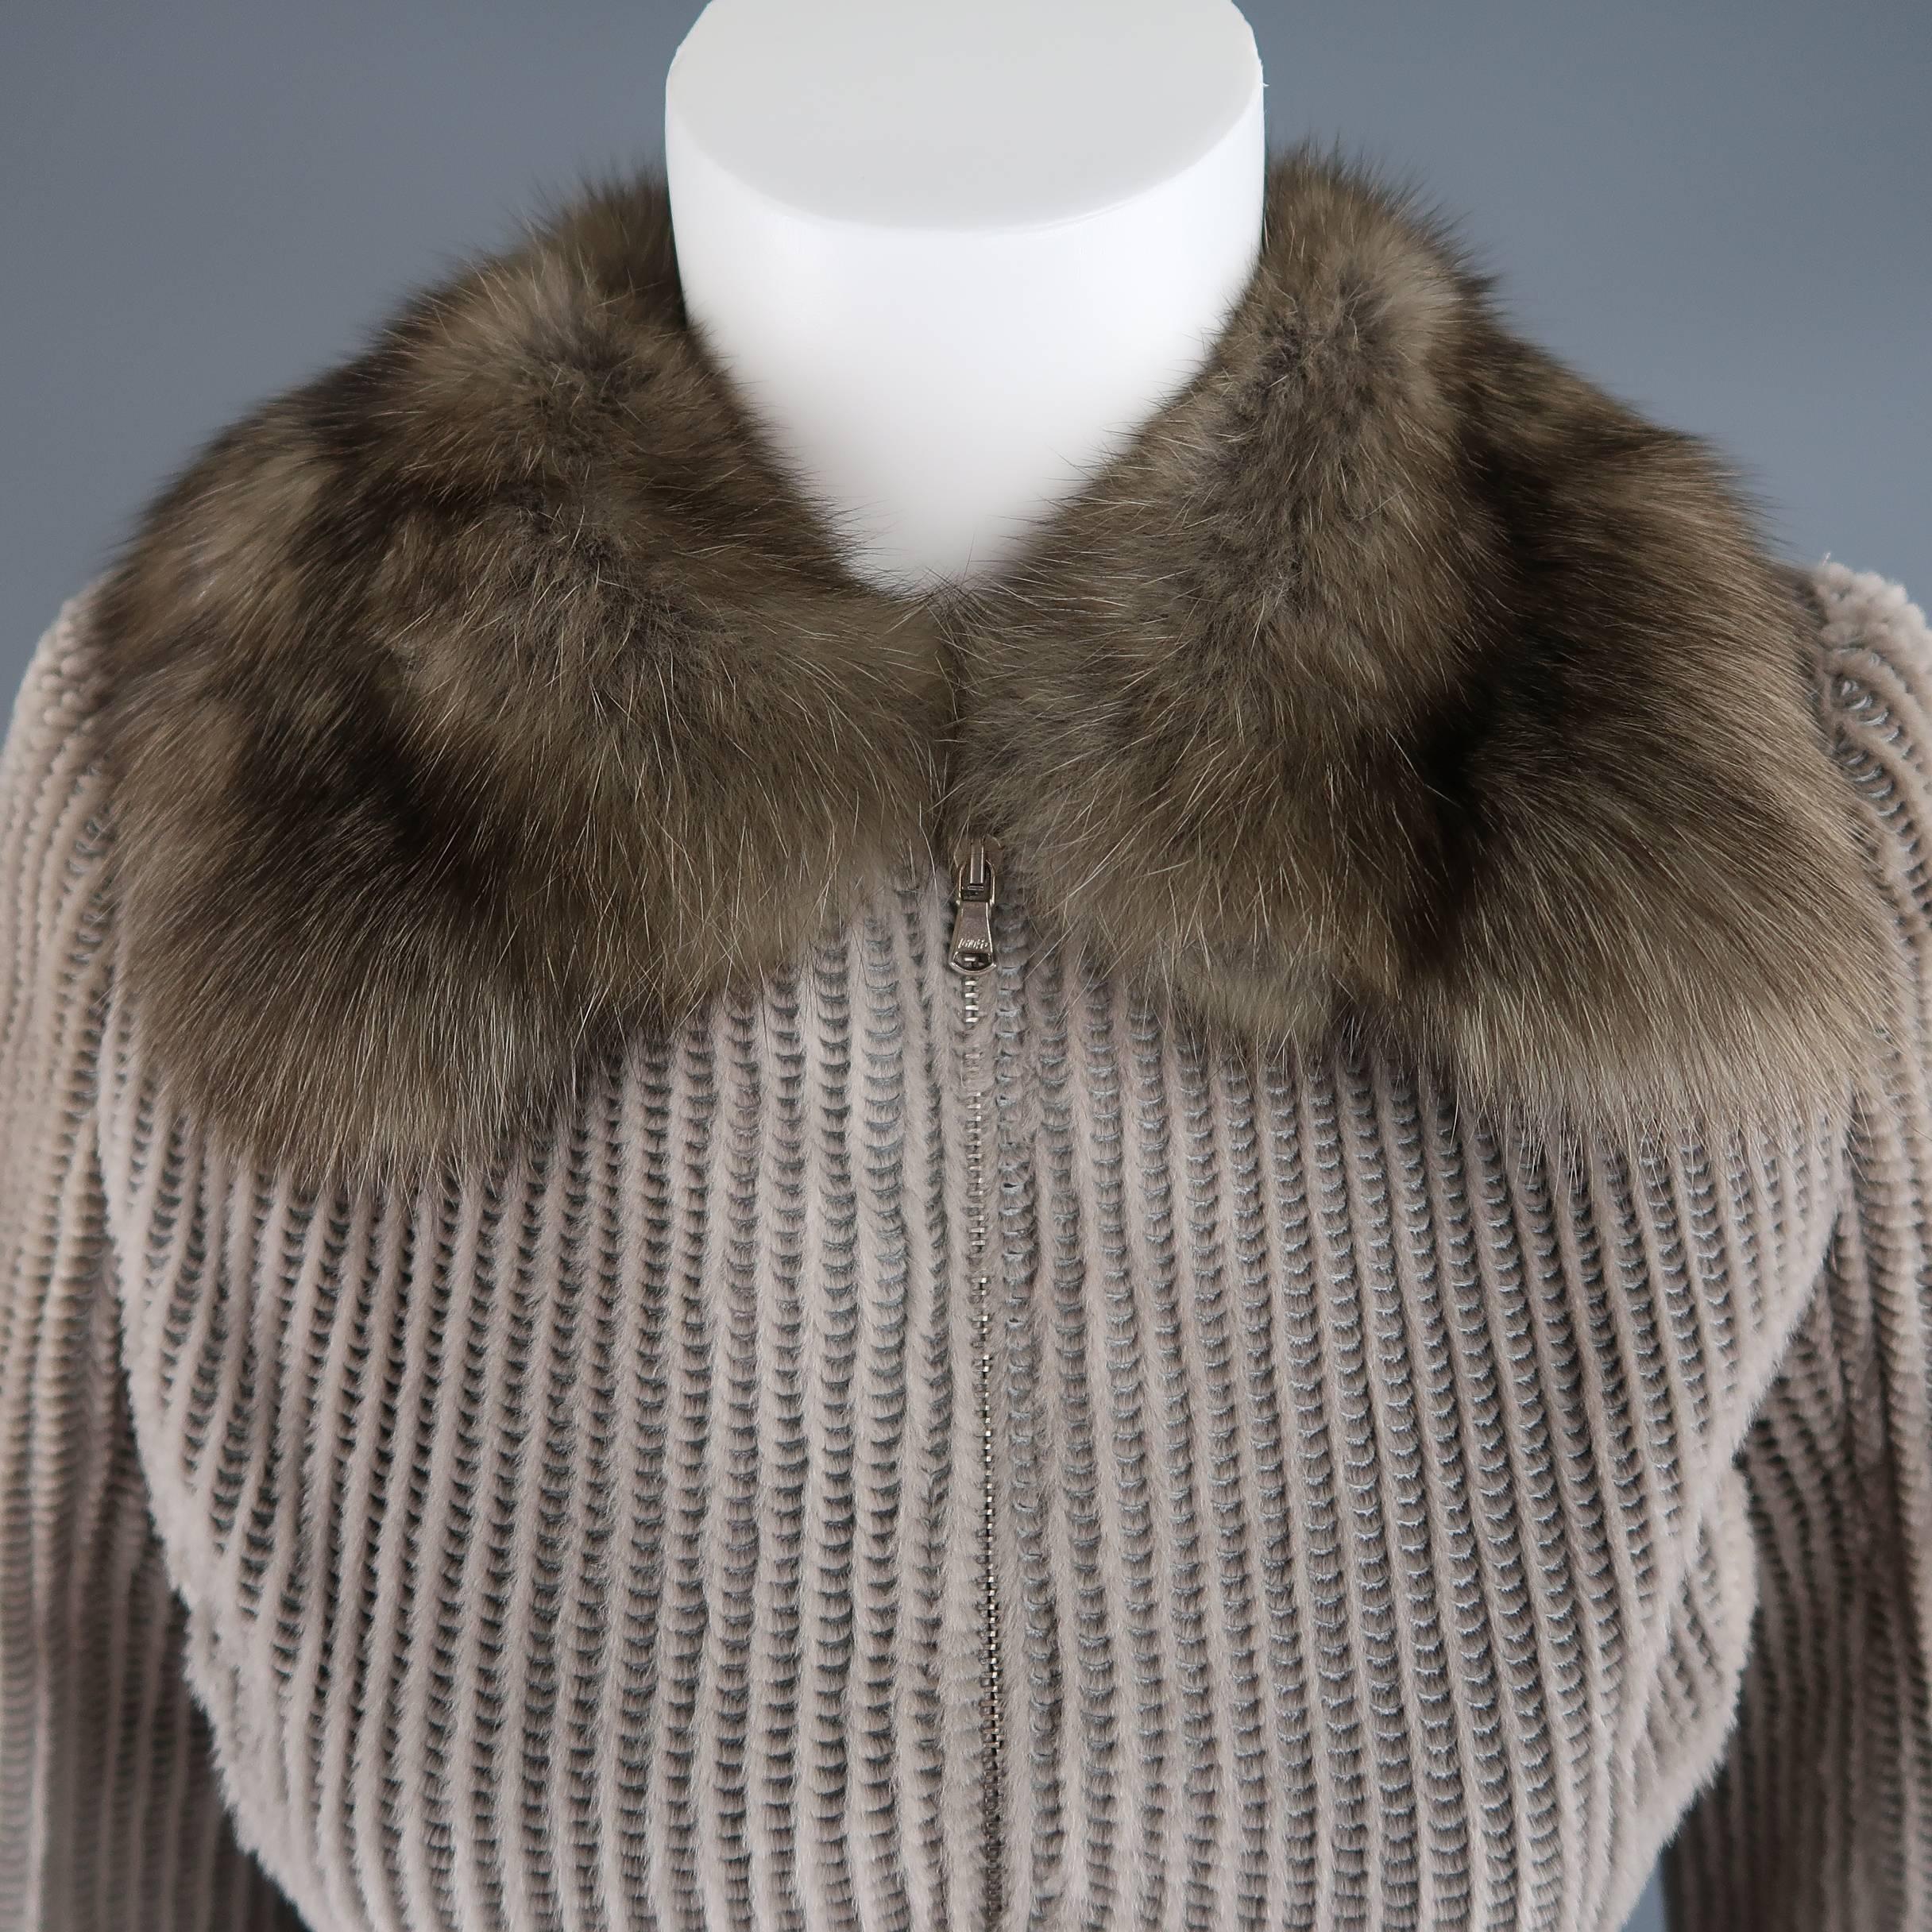 This fabulous custom Dennis Basso cocktail dress coat comes in taupe sheared mink with all over perforated texture and features a sable fur collar, zip front, beaded waistband and cuffs, silk satin liner, and box pleated A line skirt with partial